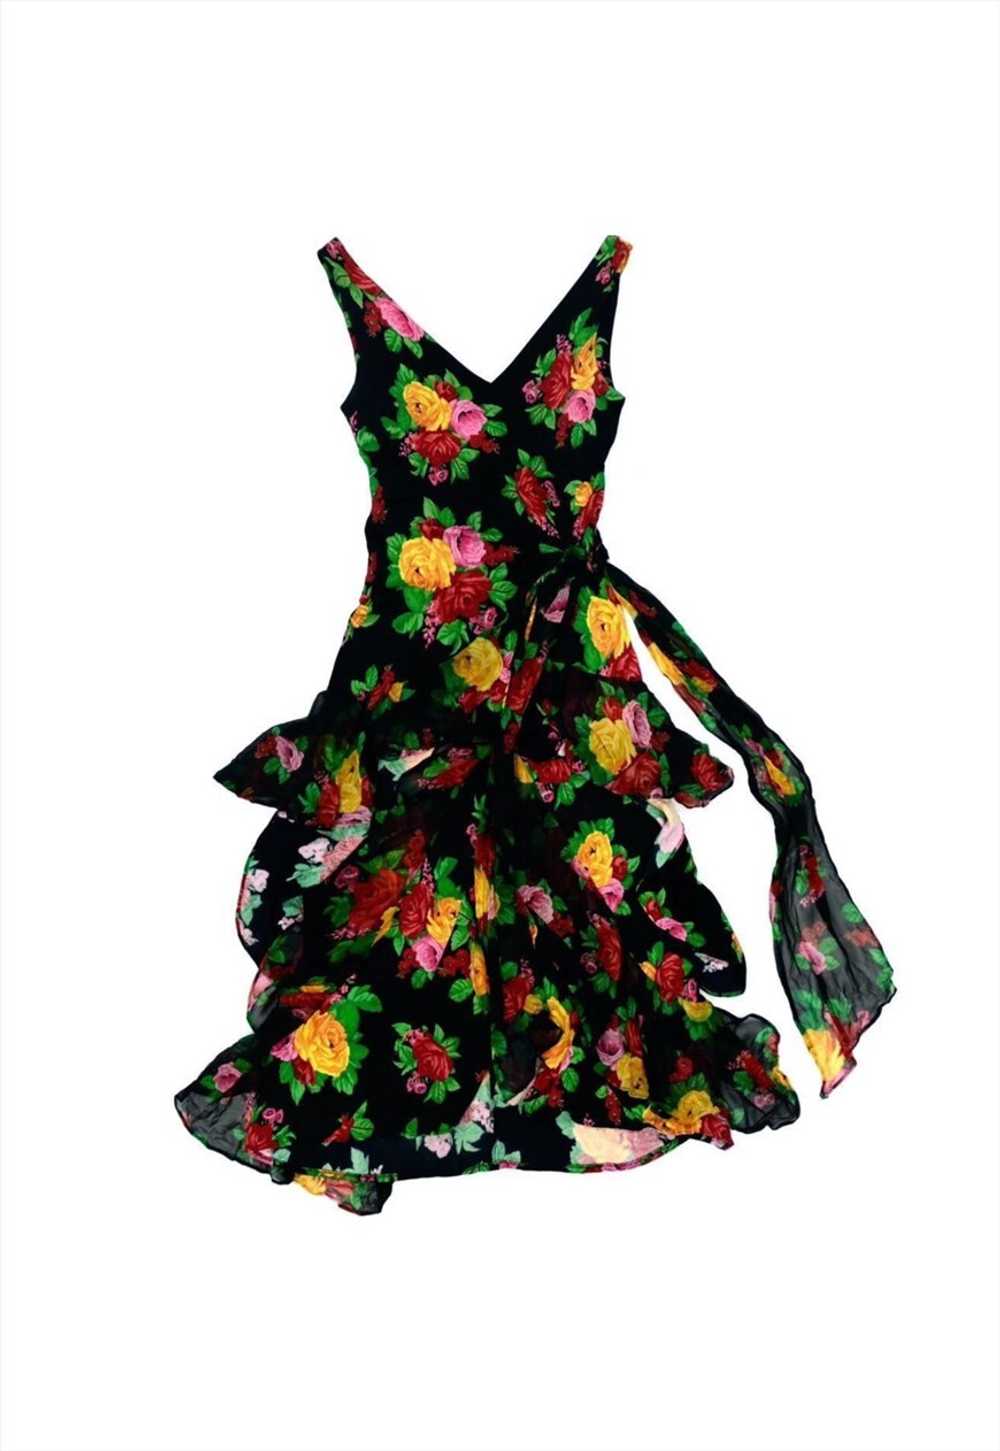 80s moschino couture floral wrap dress - image 1